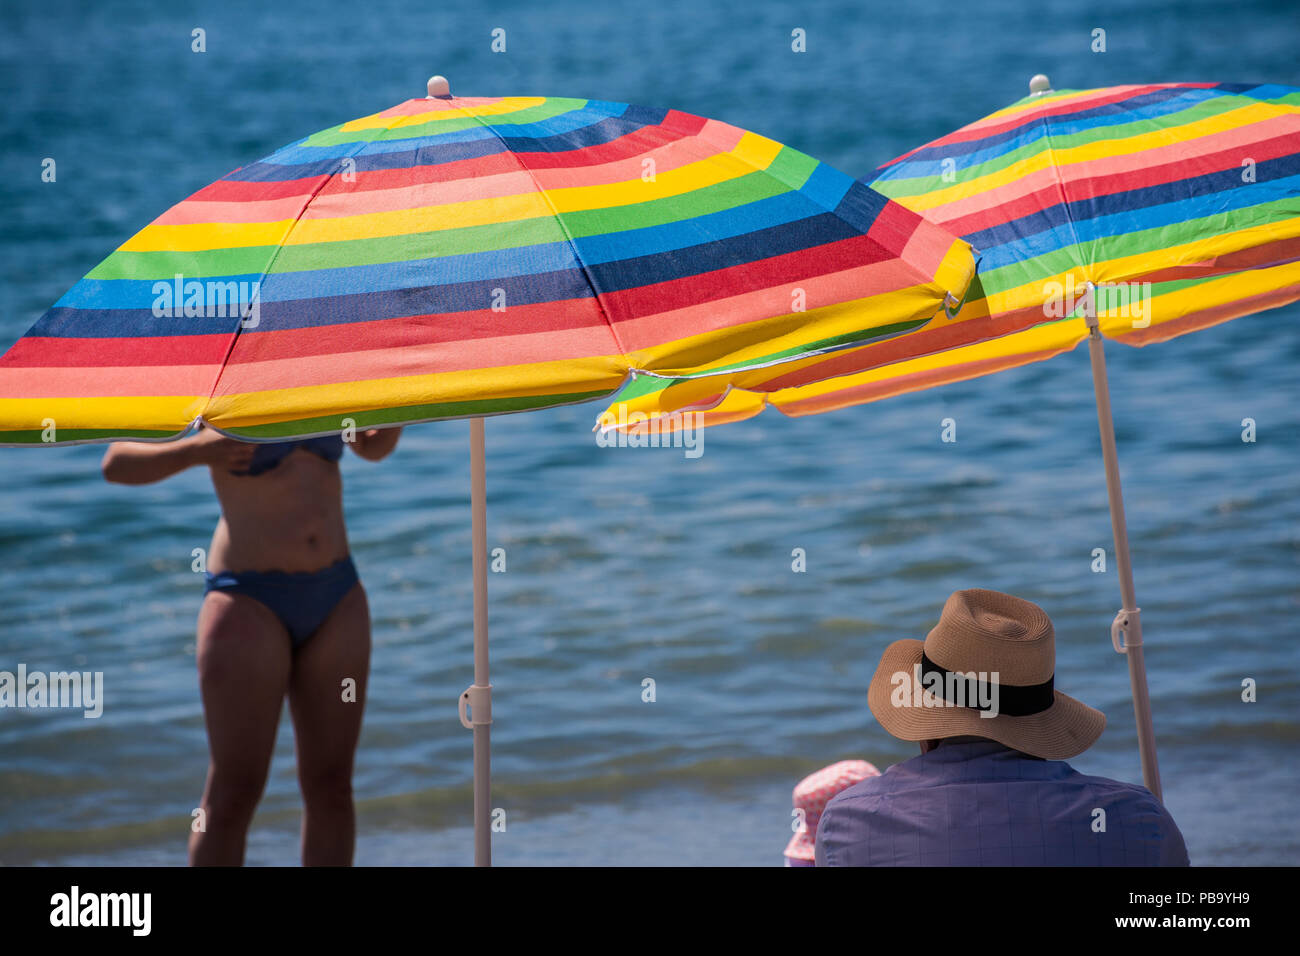 brightly colored parasols on Spanish beach Stock Photo